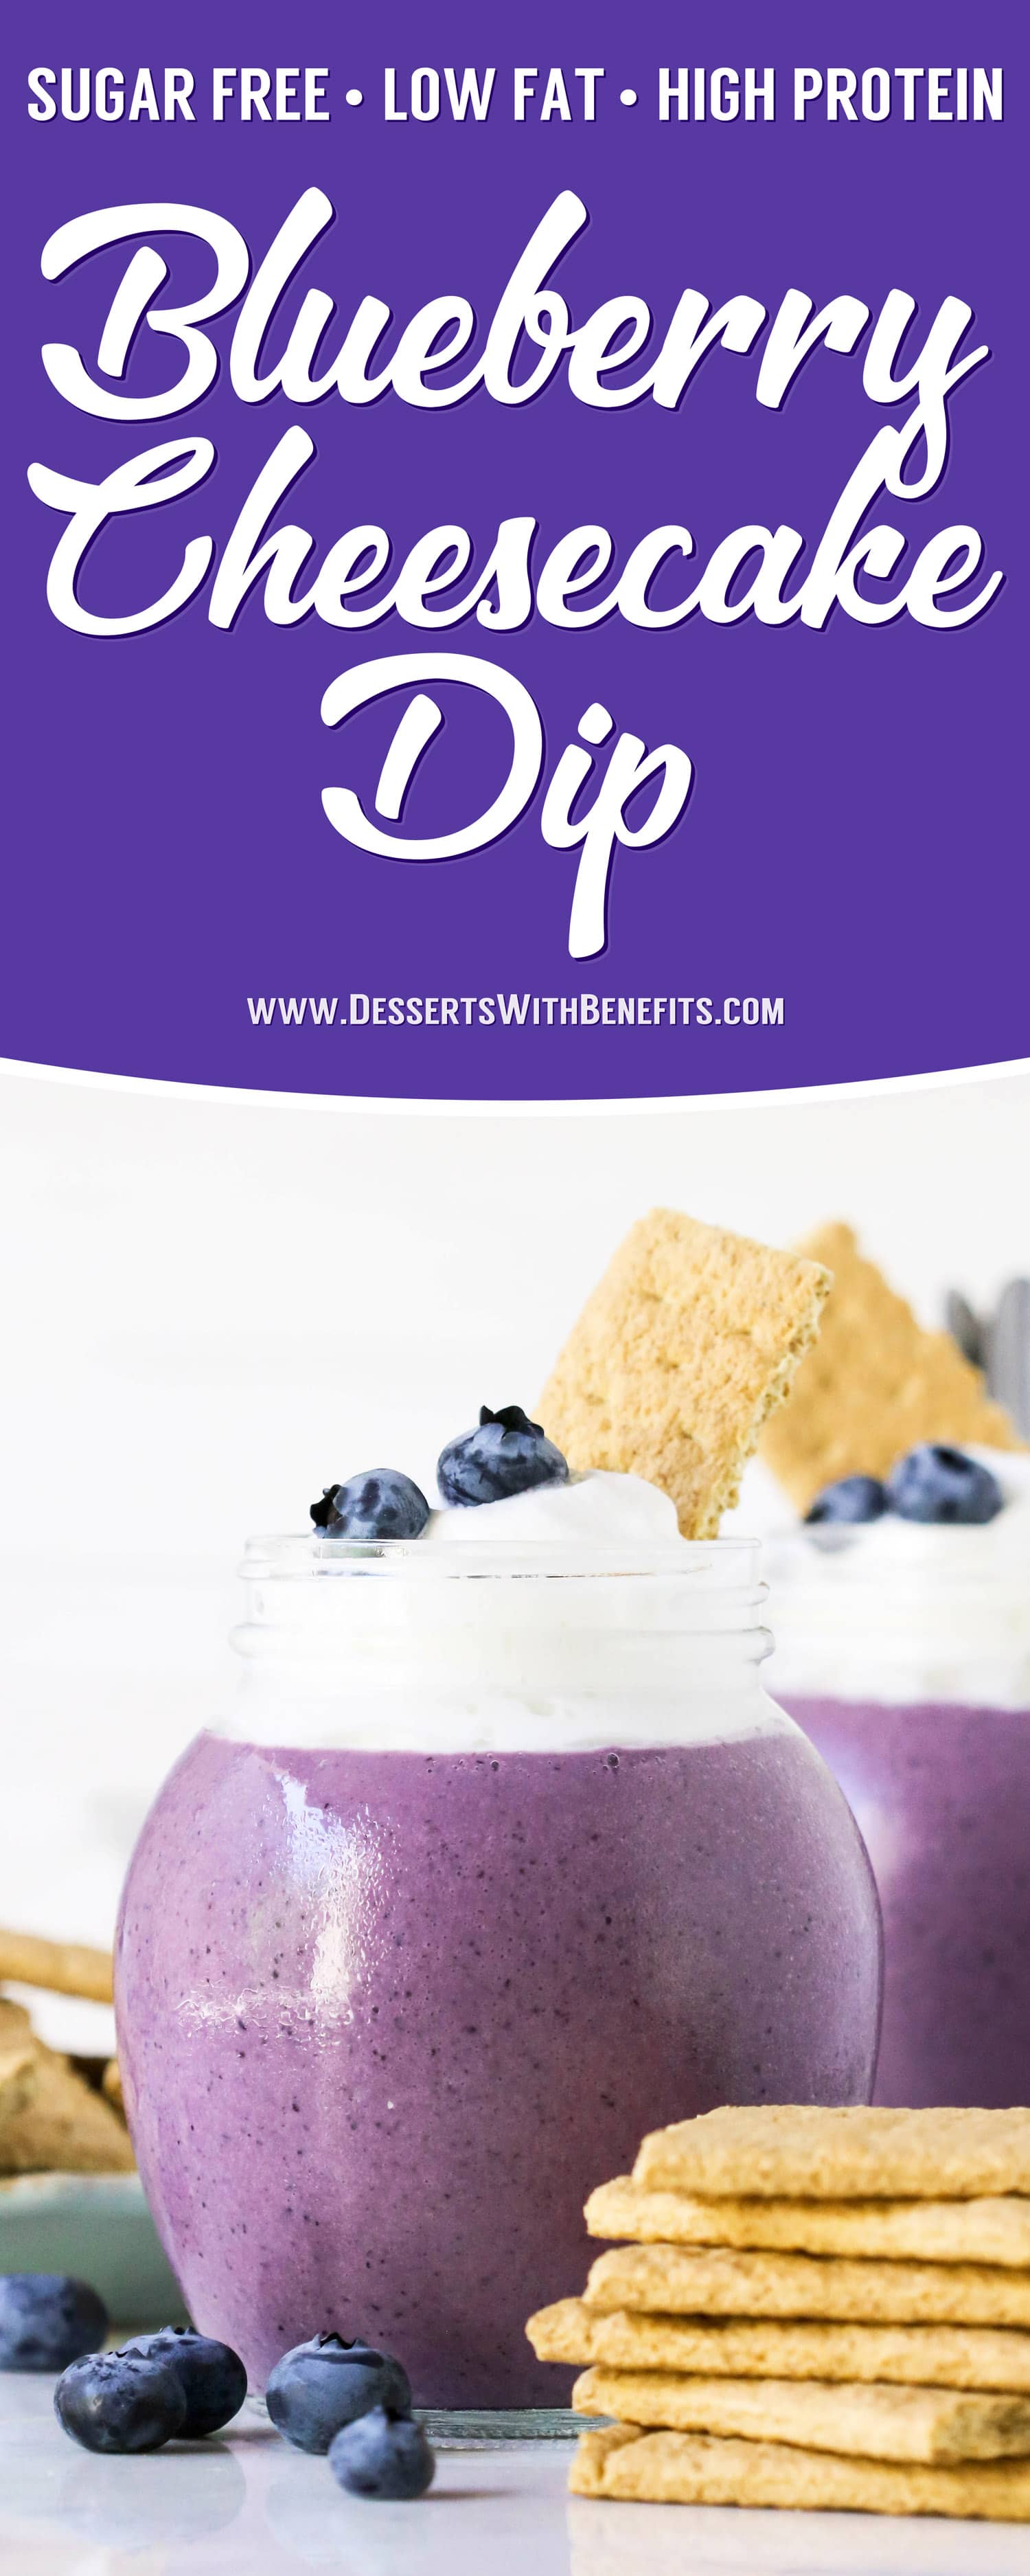 Don't have time to bake off an entire cheesecake? Make this 5-minute Blueberry Cheesecake Dip! It's thick, creamy, and sweet, just like cheesecake batter, but made with the sugar, eggs, butter, and cream cheese! You'd never know it's sugar free, low fat, high protein, and gluten free too!